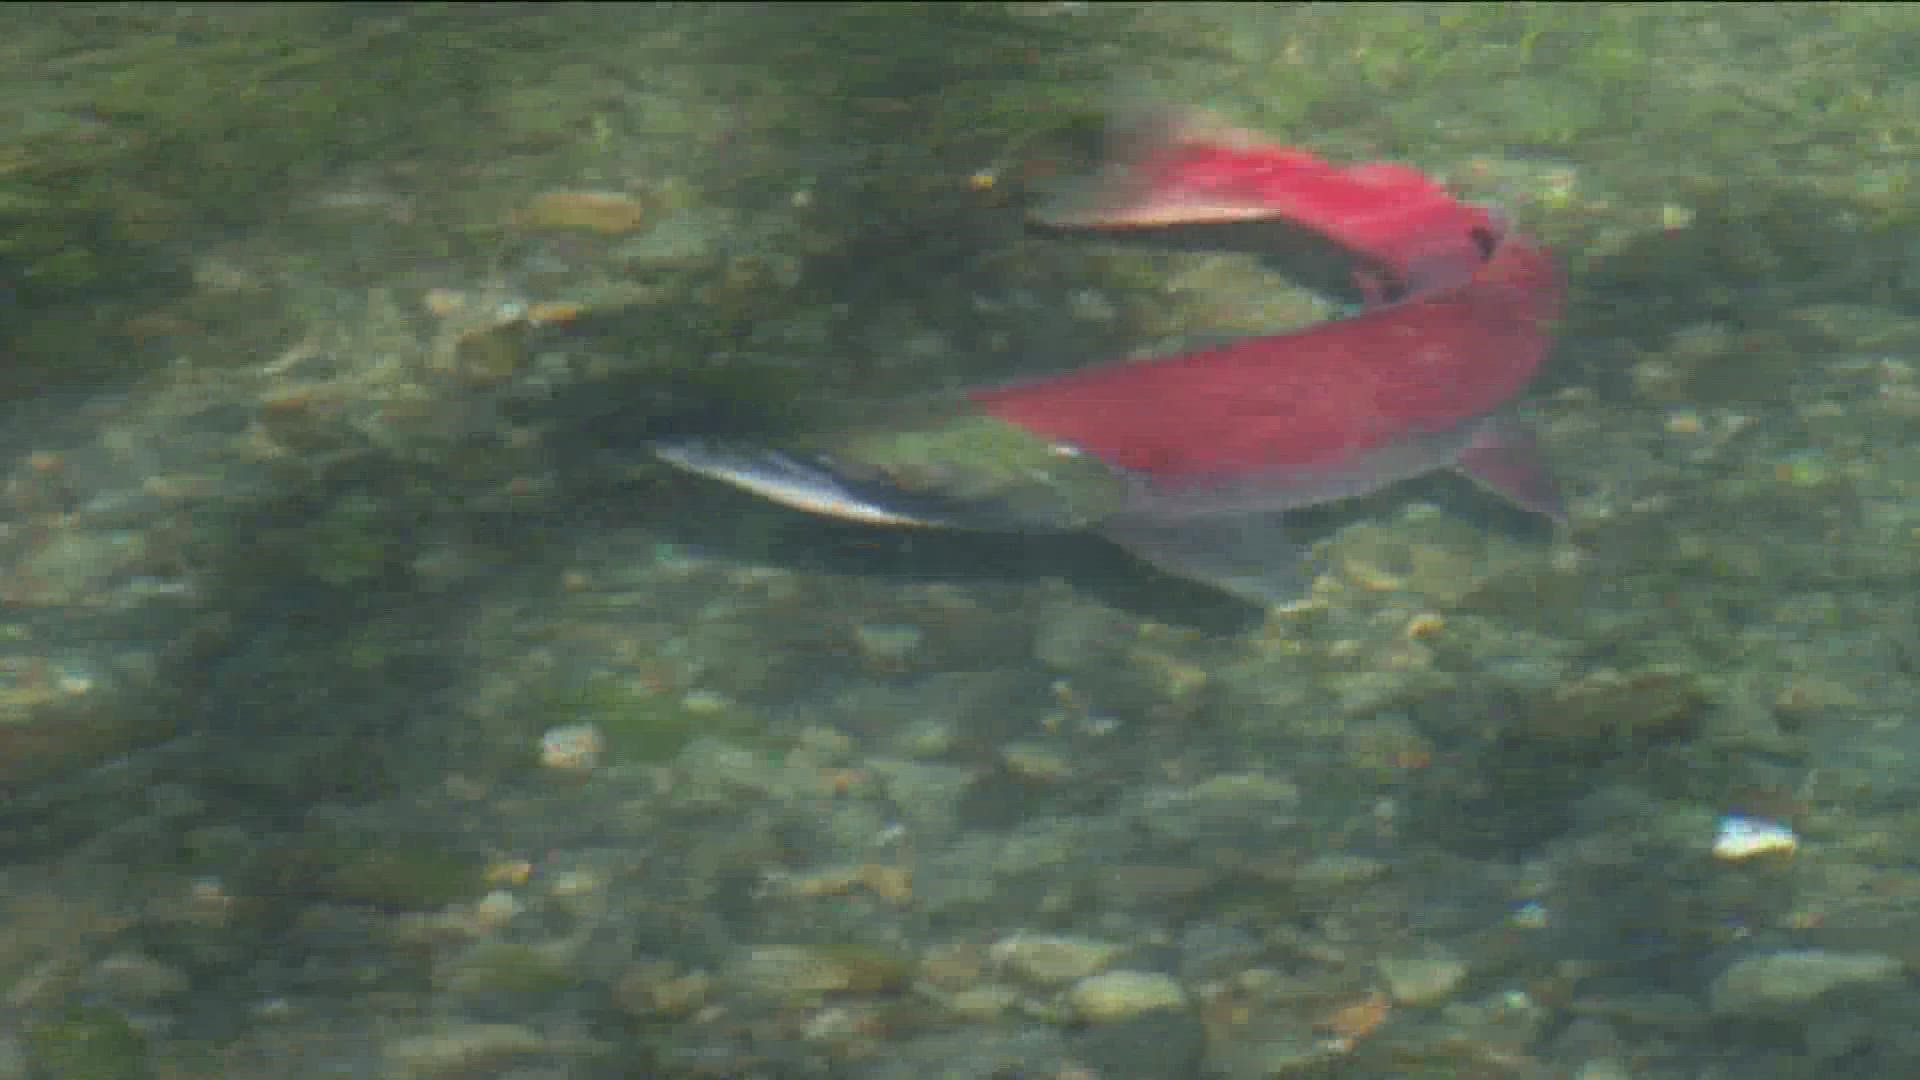 Through July 10th, 584 sockeye have crossed the Lower Granite Dam, located just 30 miles downstream from Lewiston.